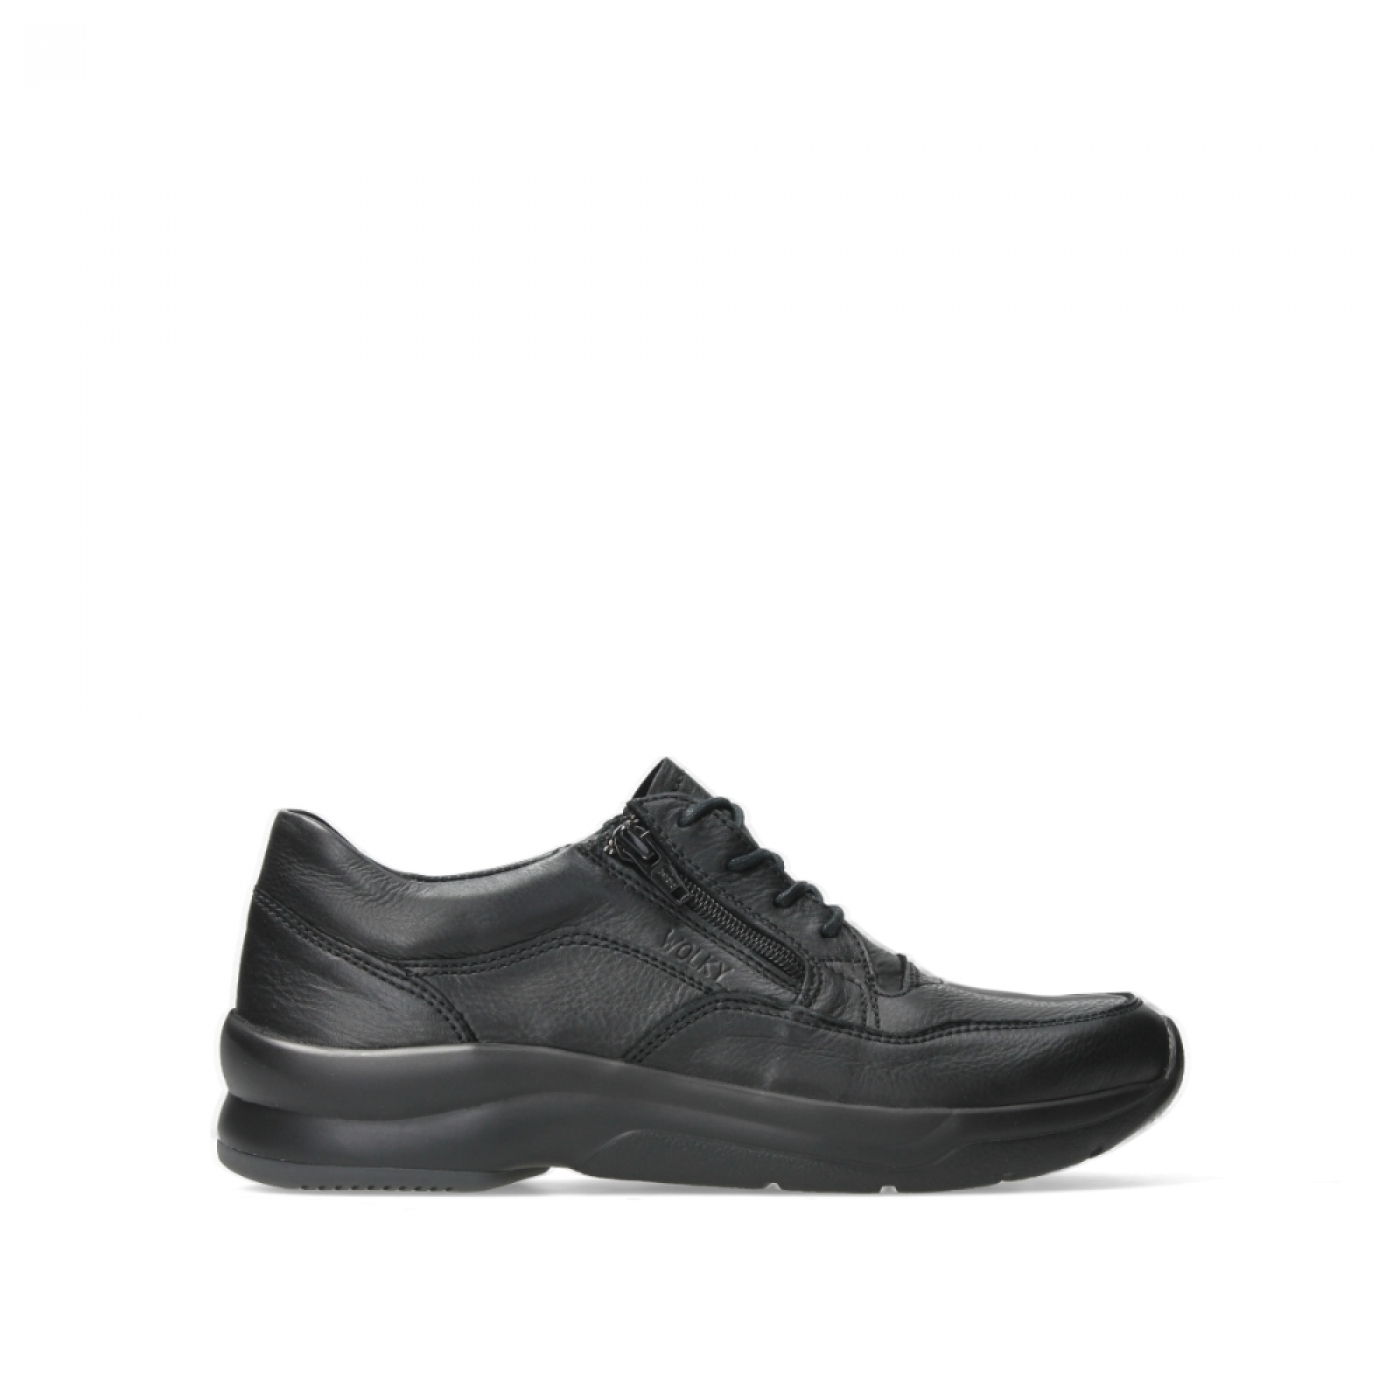 Wolky Shoes 05890 Ozark black leather order now! Biggest Wolky ...